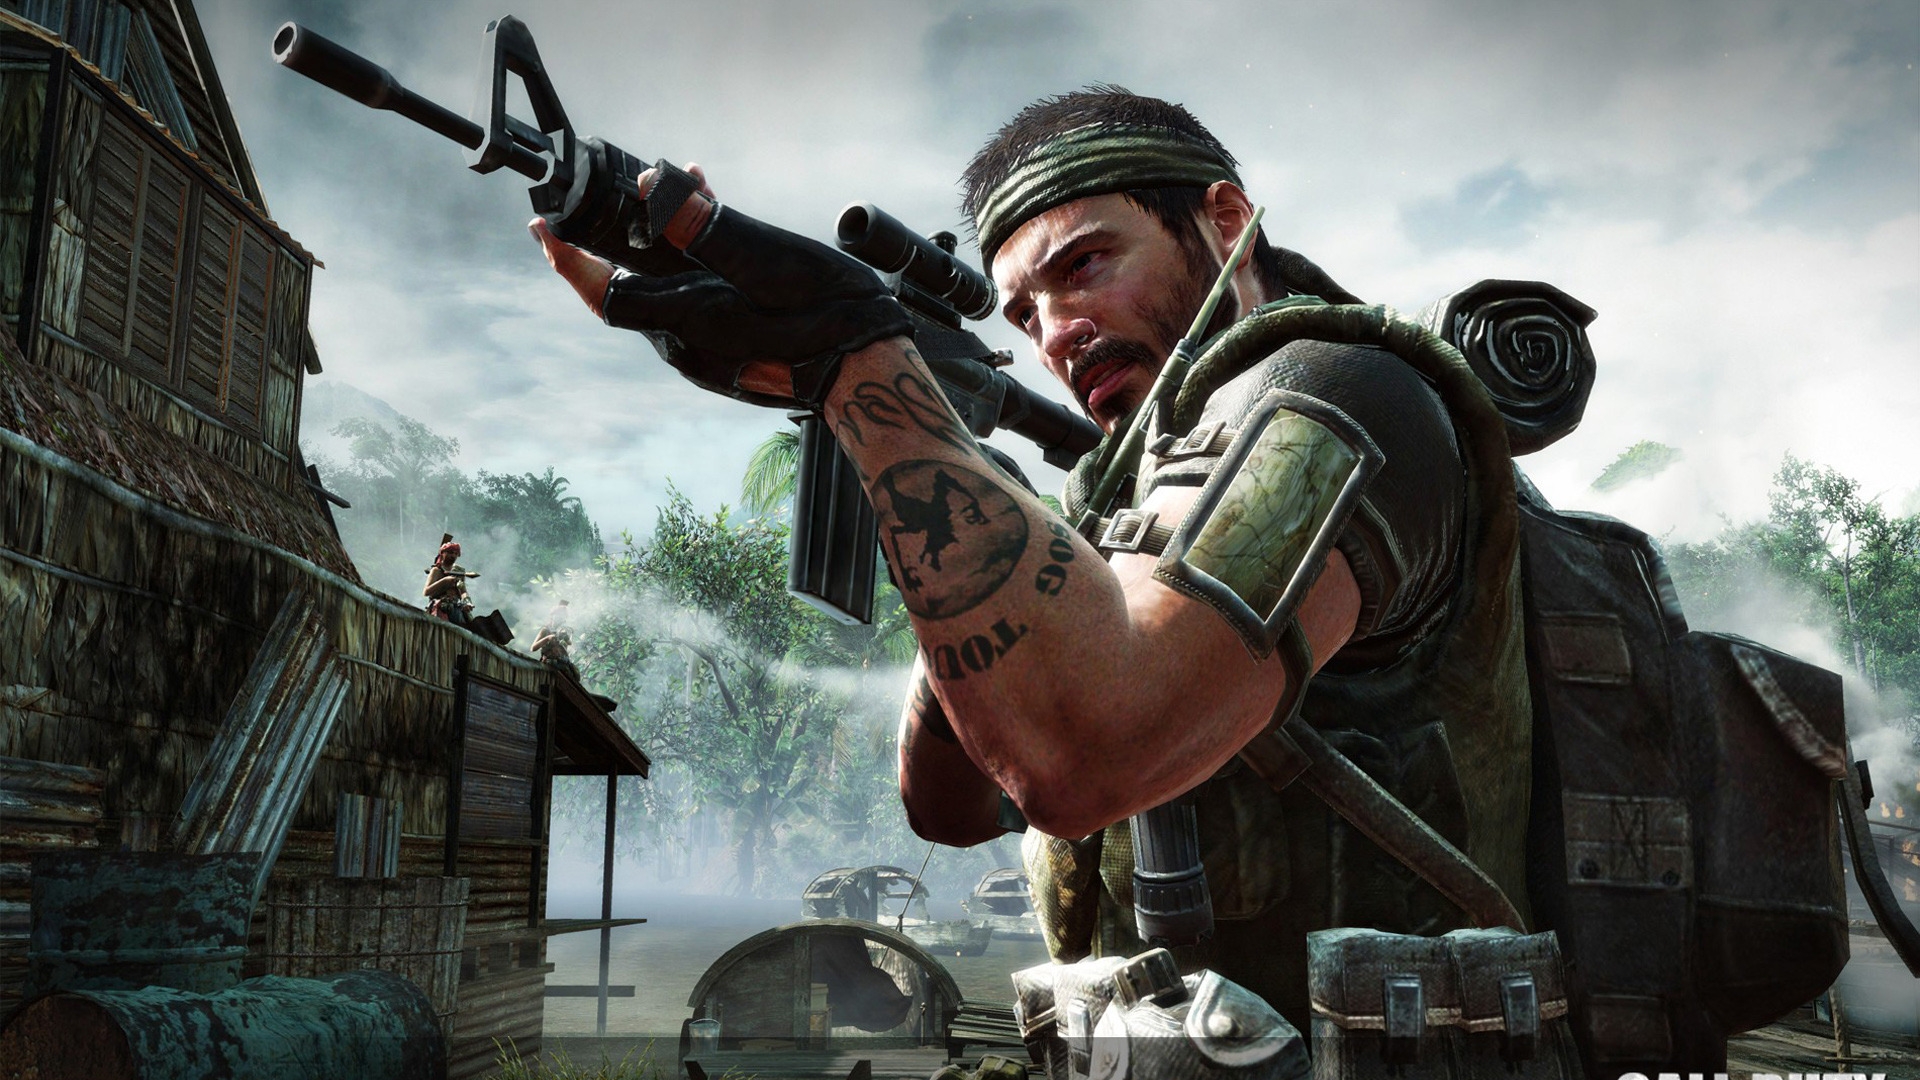 Call of Duty Black Ops Soldier for 1920 x 1080 HDTV 1080p resolution